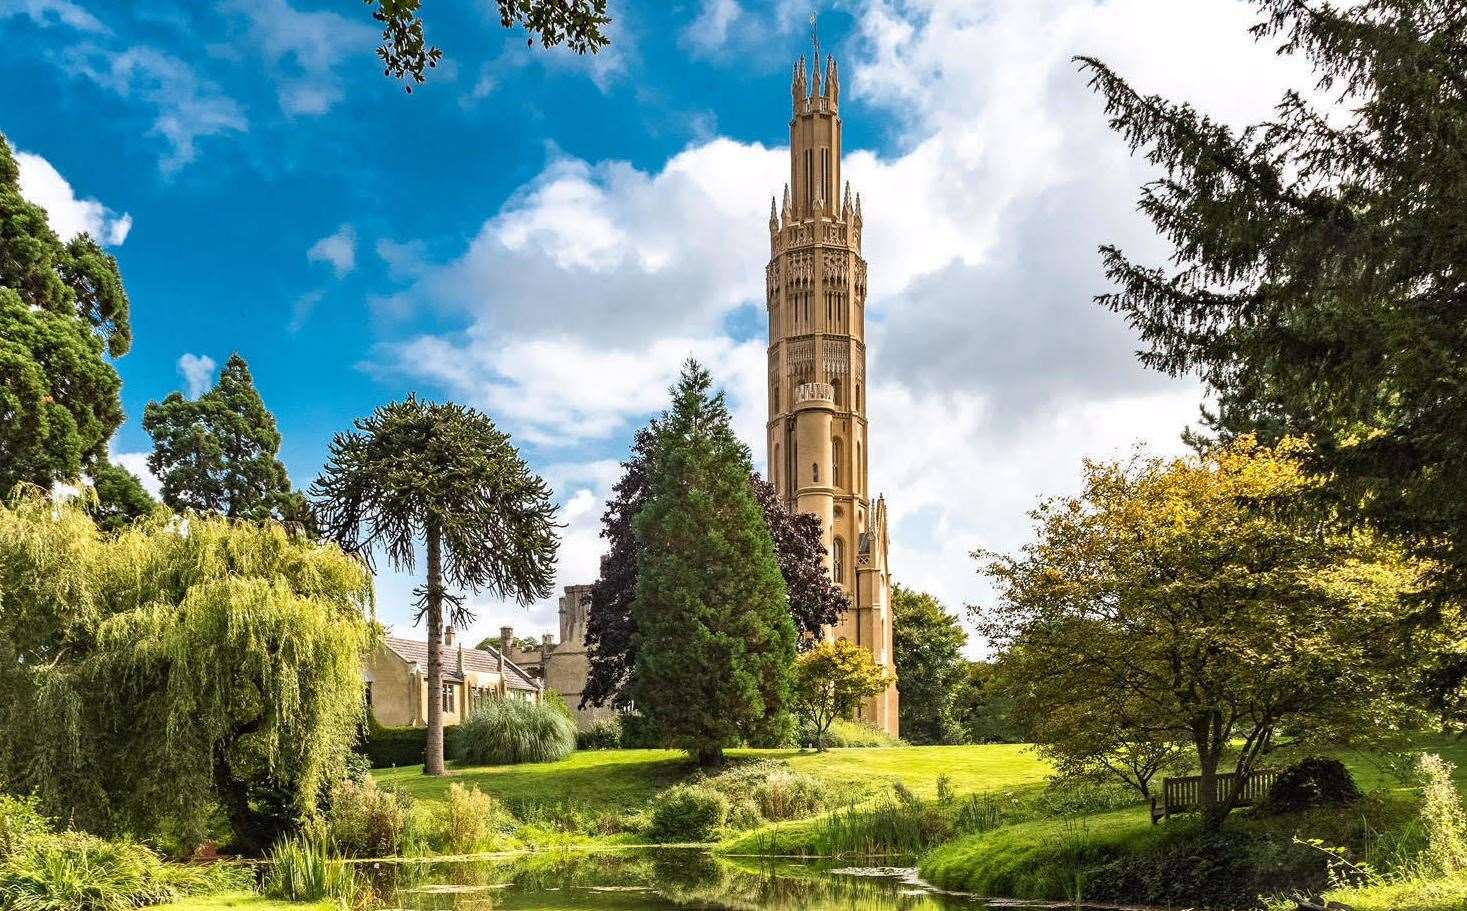 It's not the cheapest place to stay, but Hadlow Tower does have the 'wow' factor